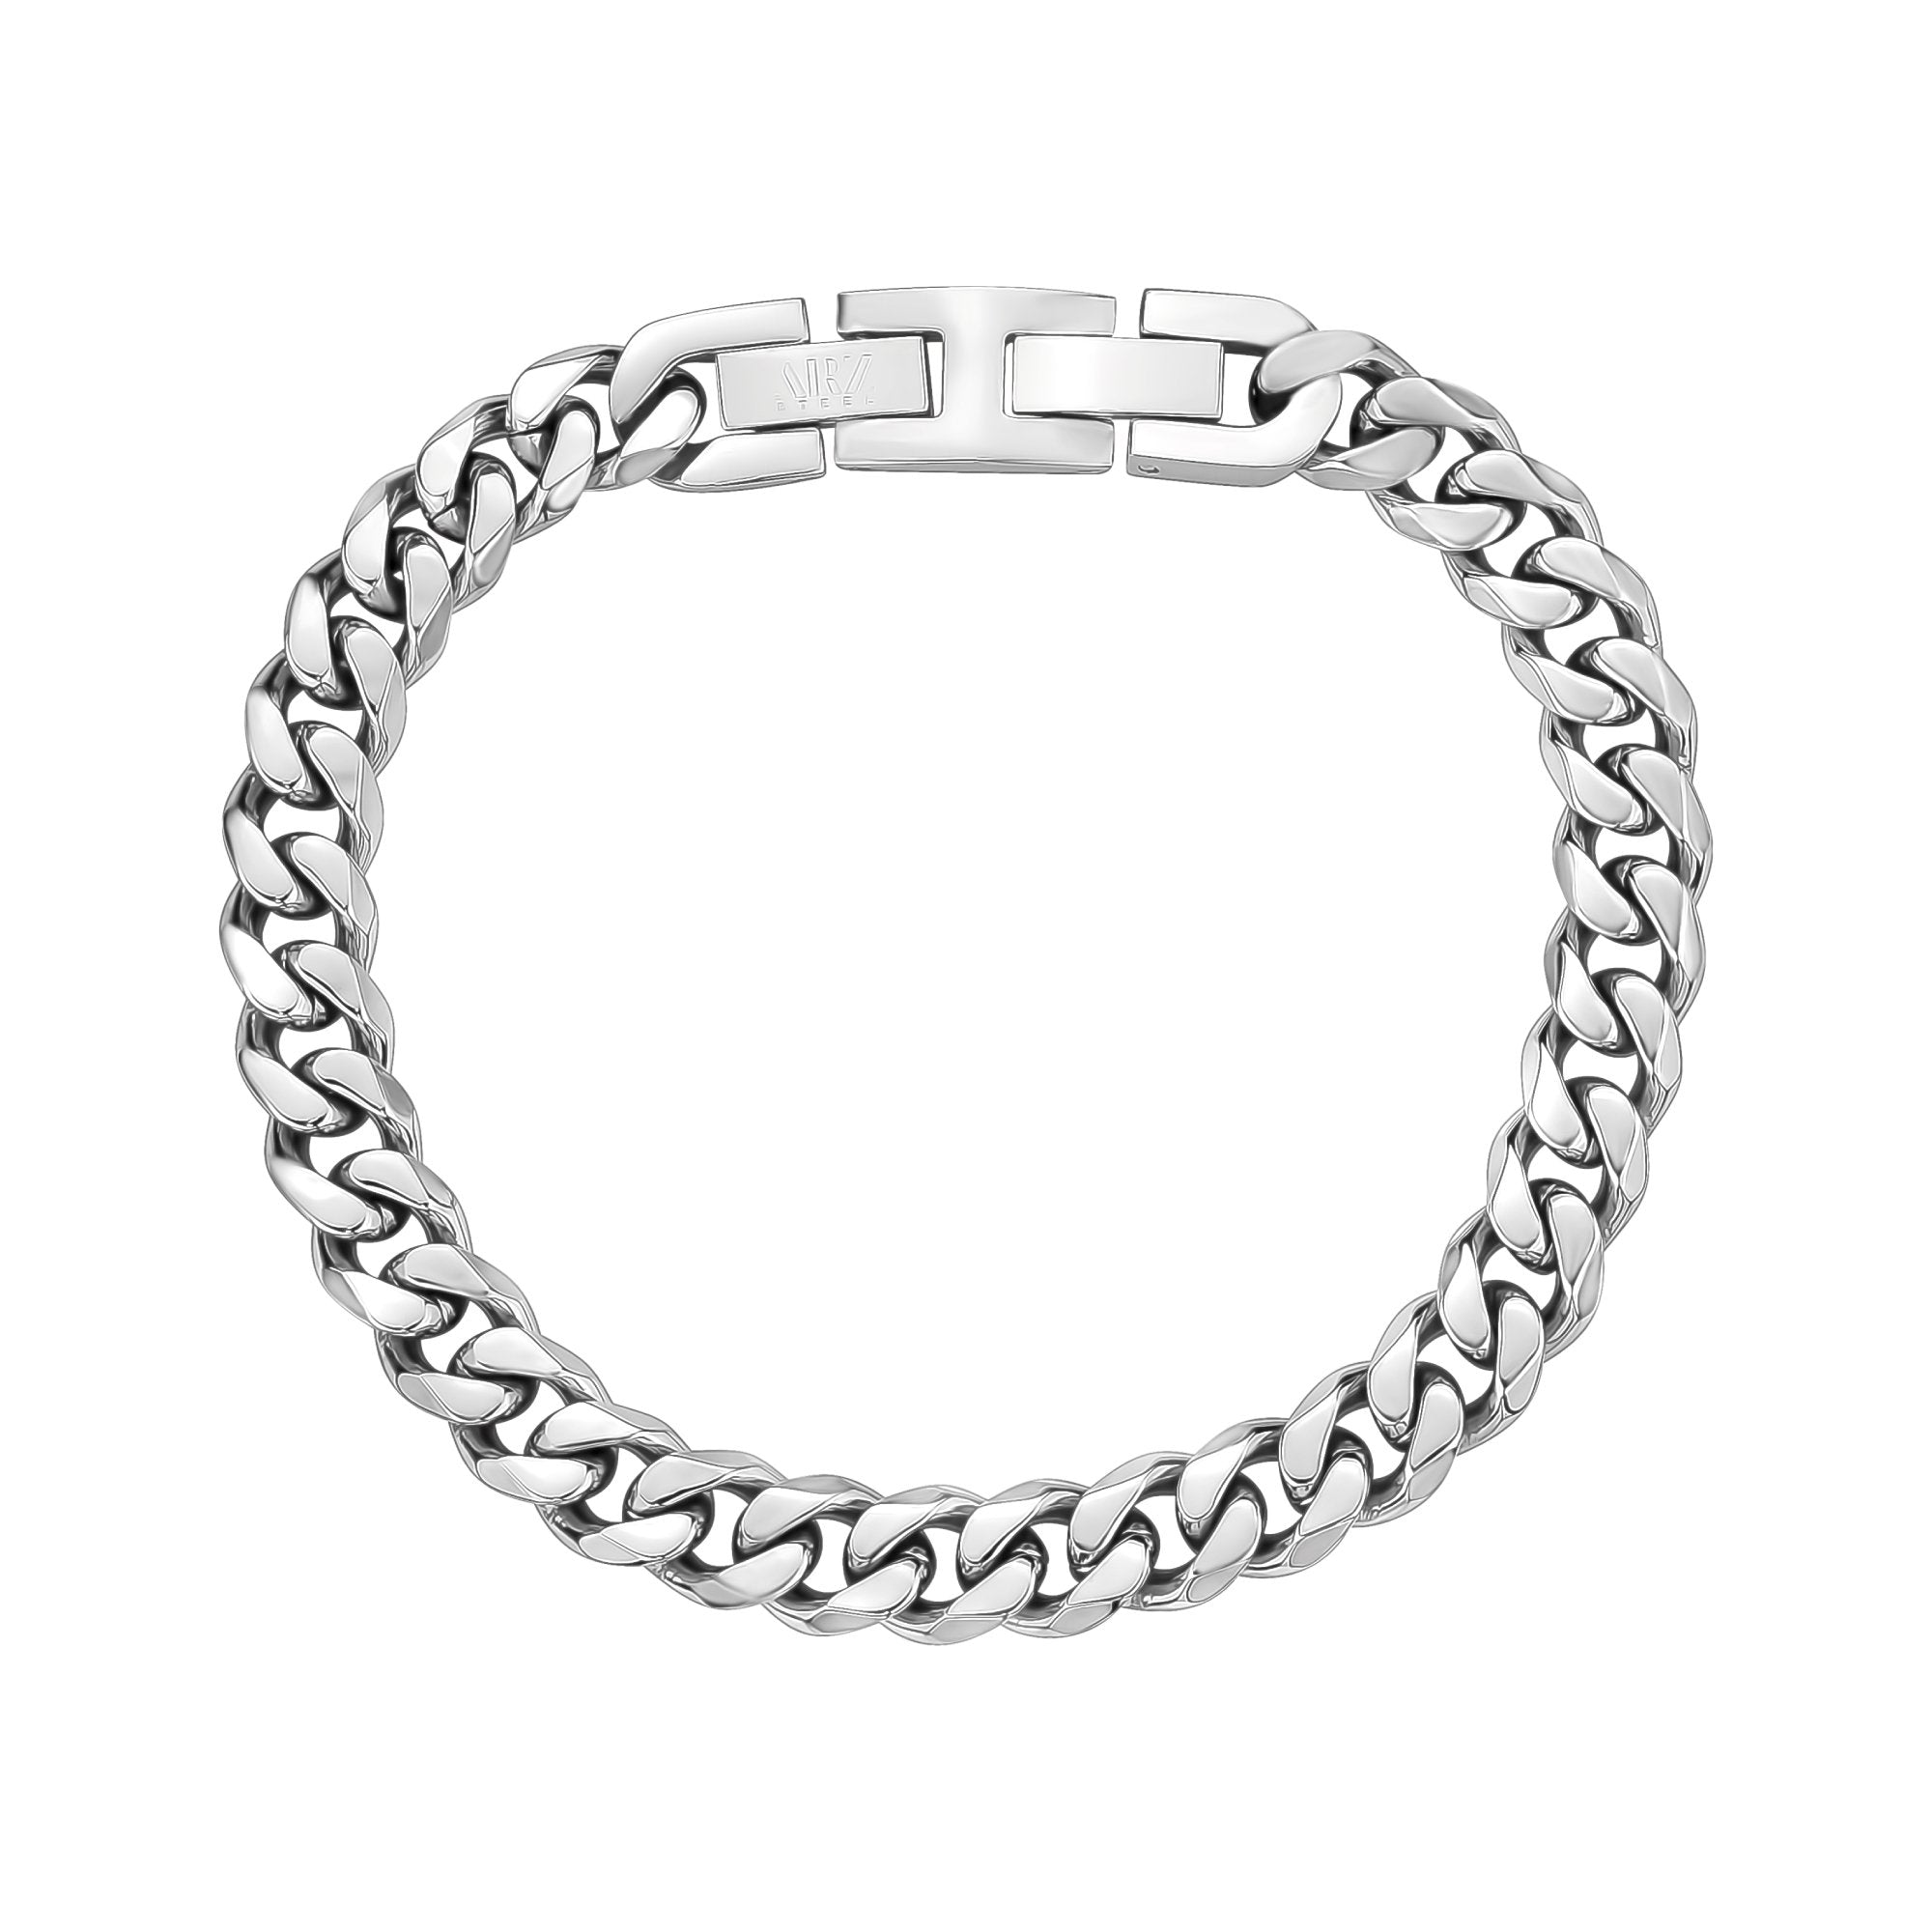 8mm Stainless Steel Cuban Link Chain and Bracelet L (8.5-9) / Silver